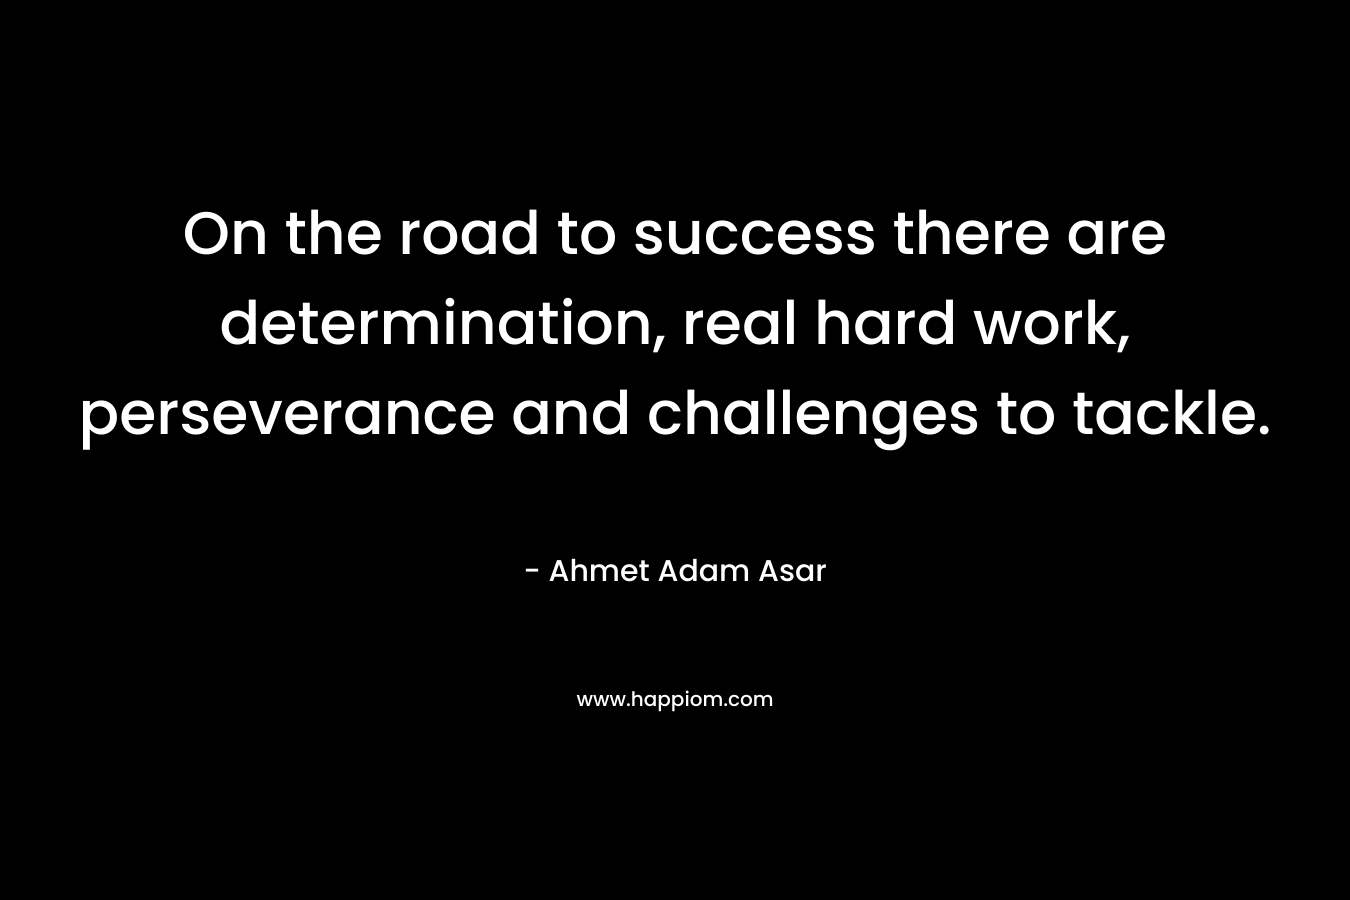 On the road to success there are determination, real hard work, perseverance and challenges to tackle.